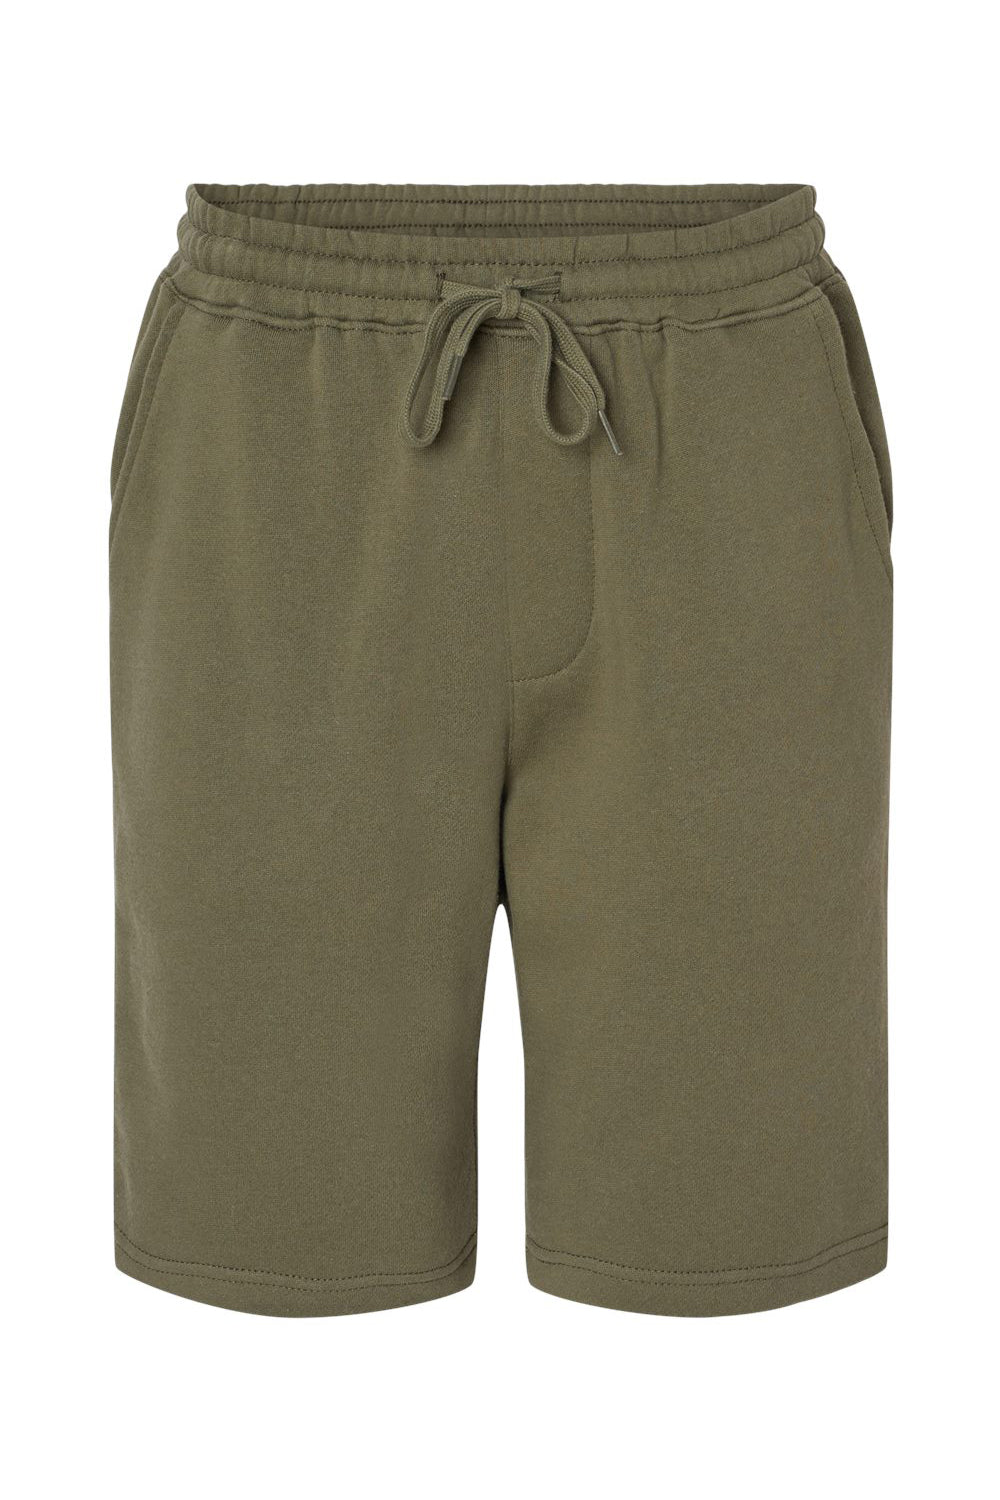 Independent Trading Co. IND20SRT Mens Fleece Shorts w/ Pockets Army Green Flat Front